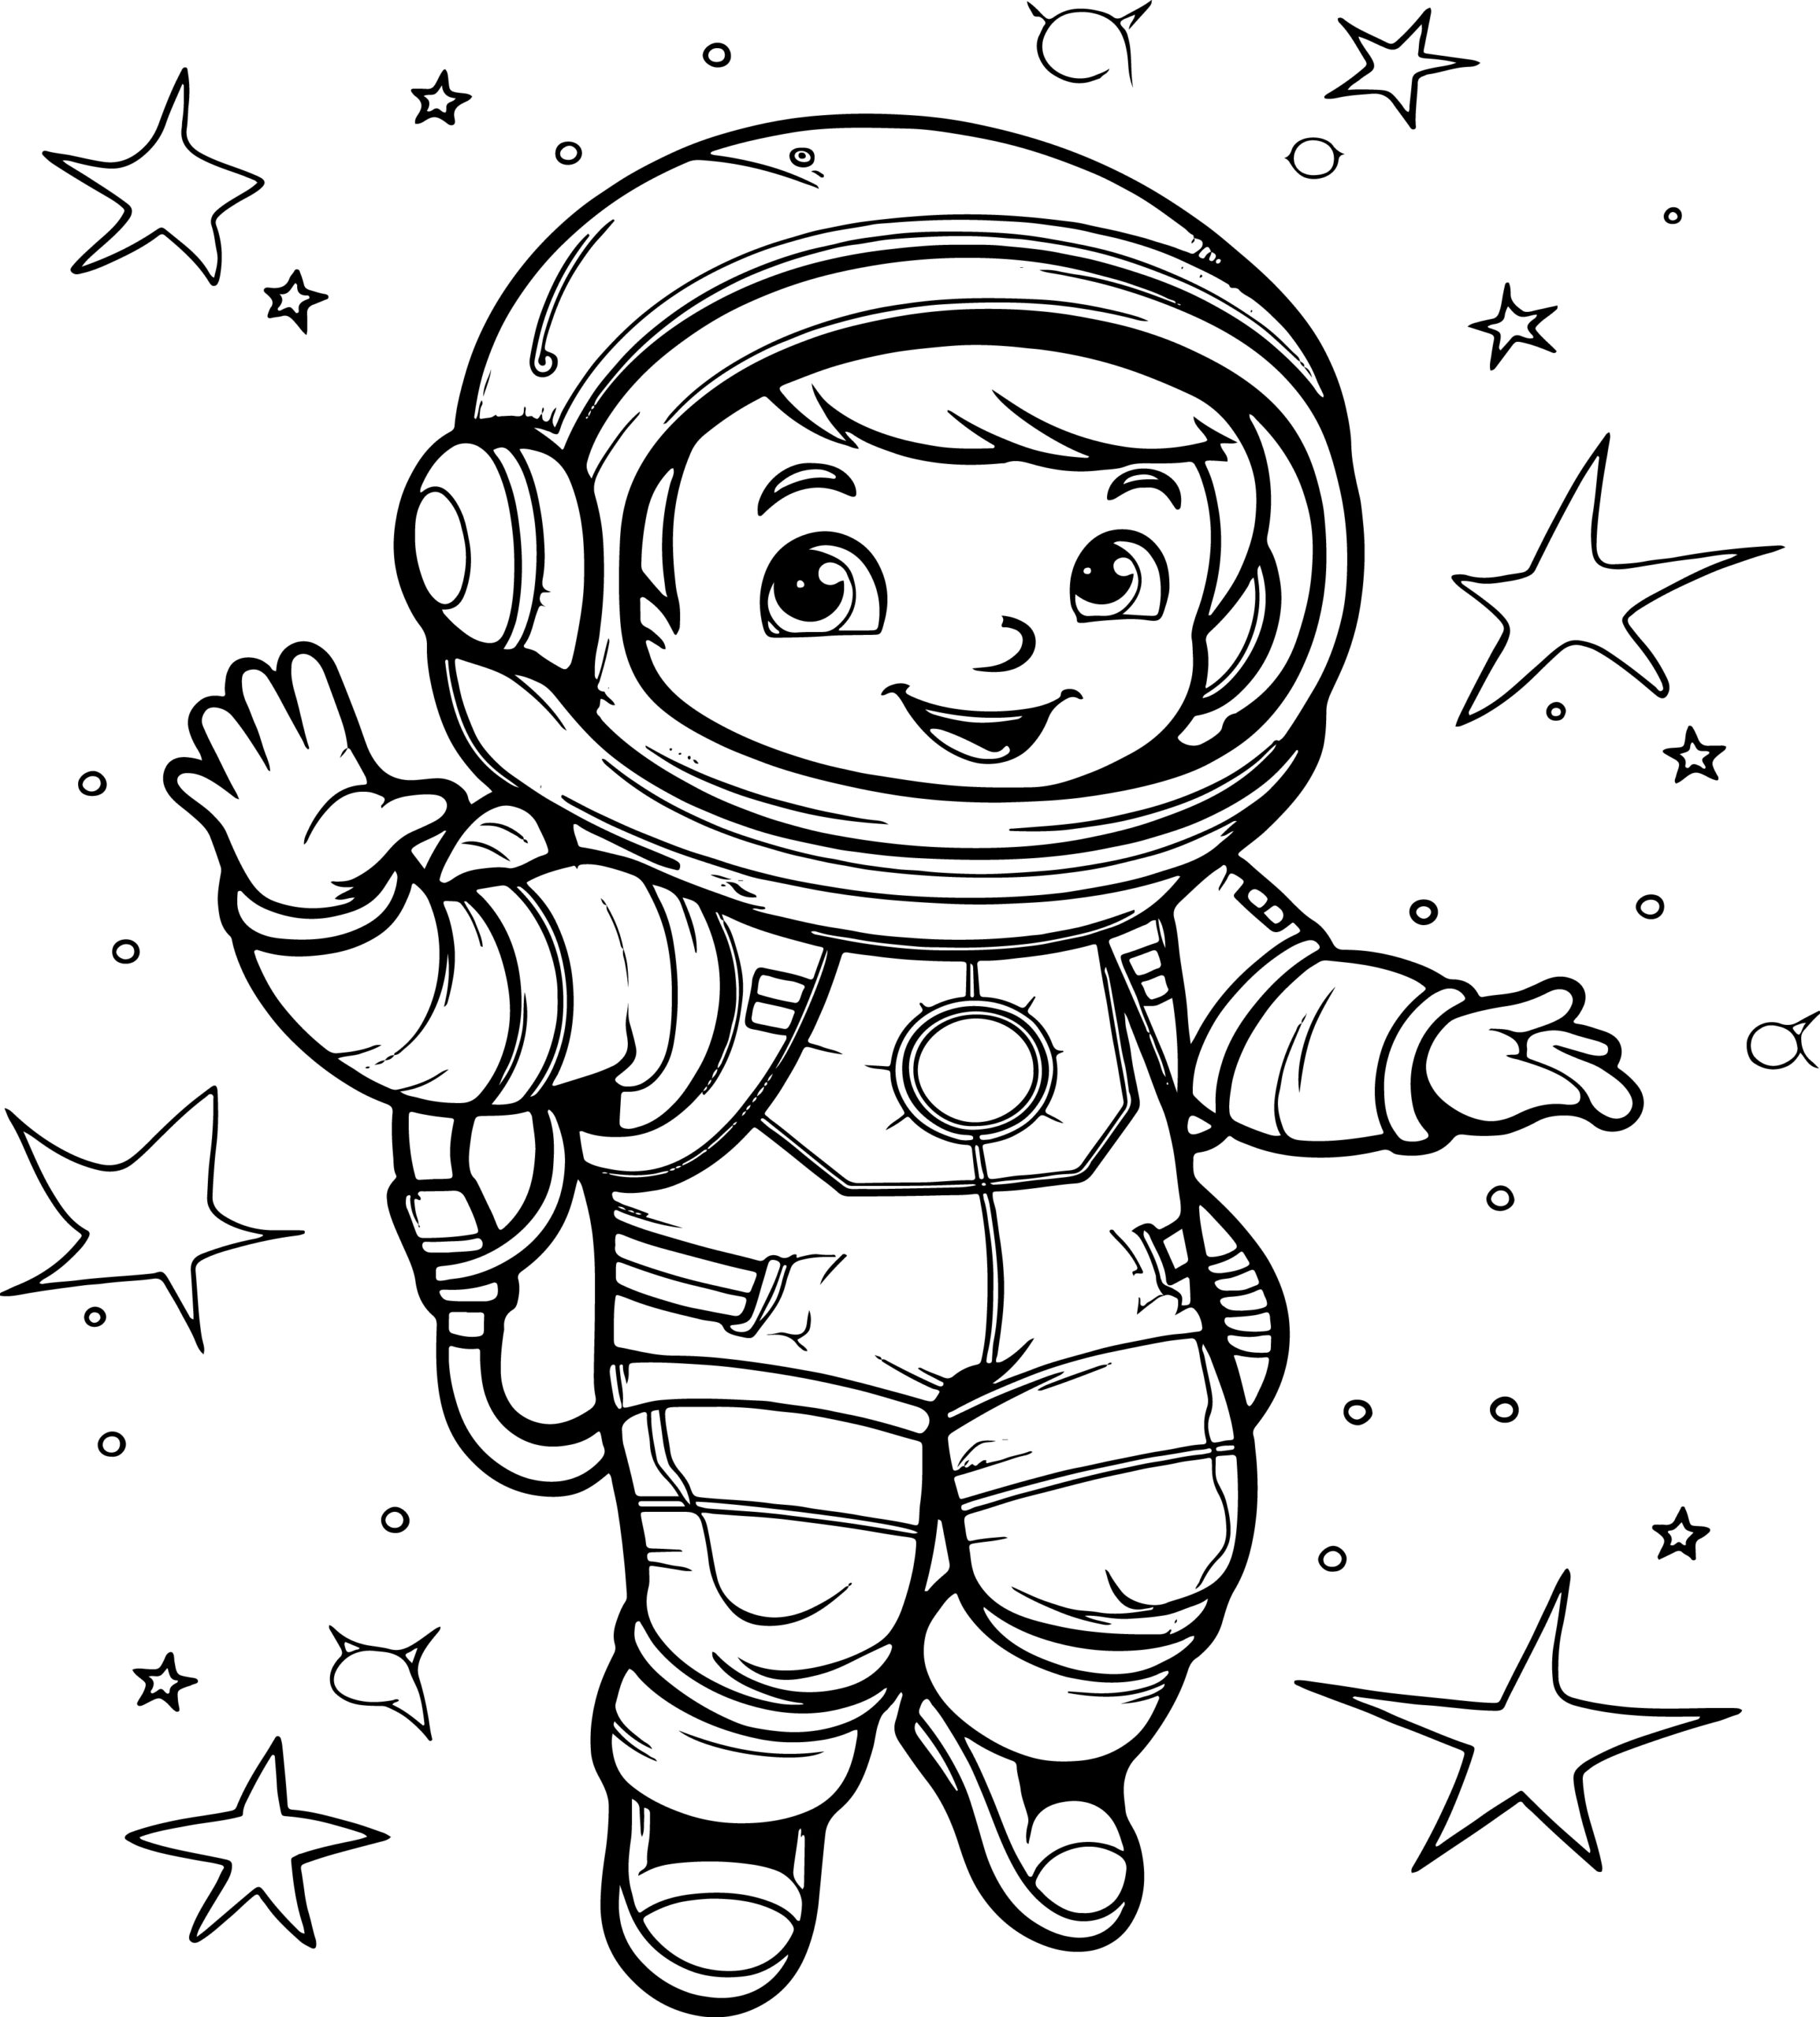 Space coloring book for kids who love outer space coloring pages of planets made by teachers